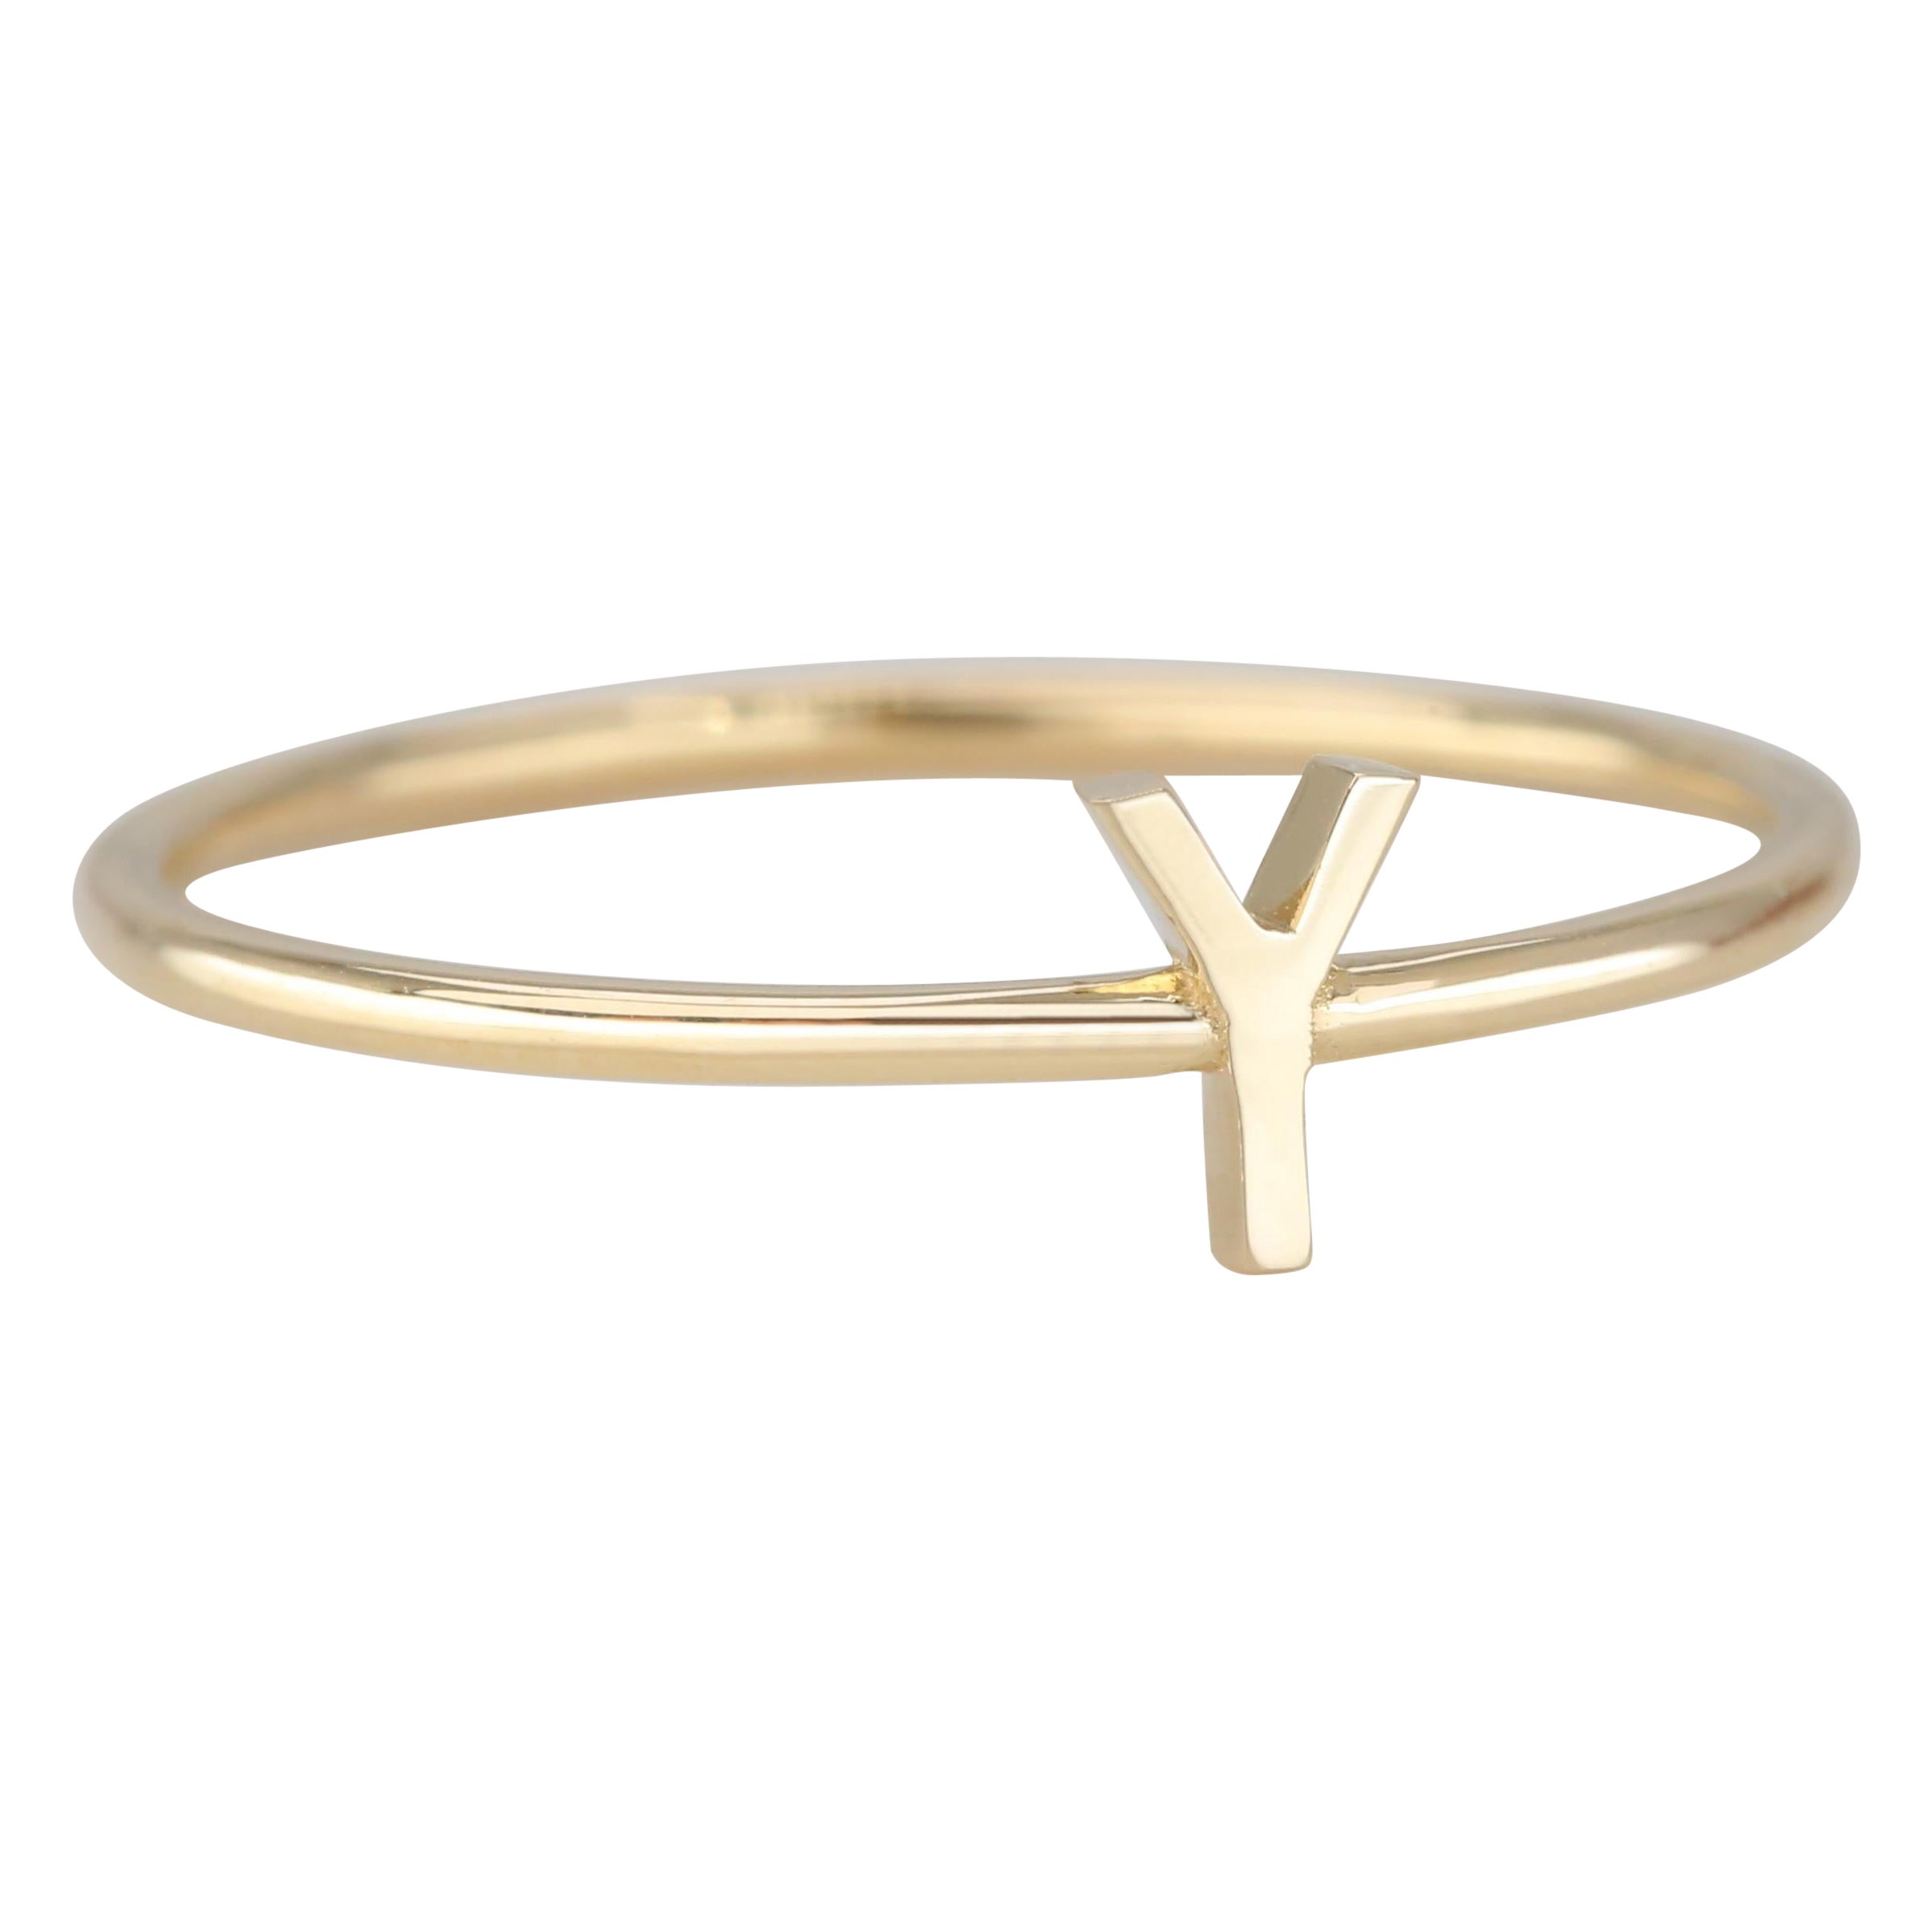 For Sale:  14K Gold Initial Y Letter Ring, Personalized Initial Letter Ring